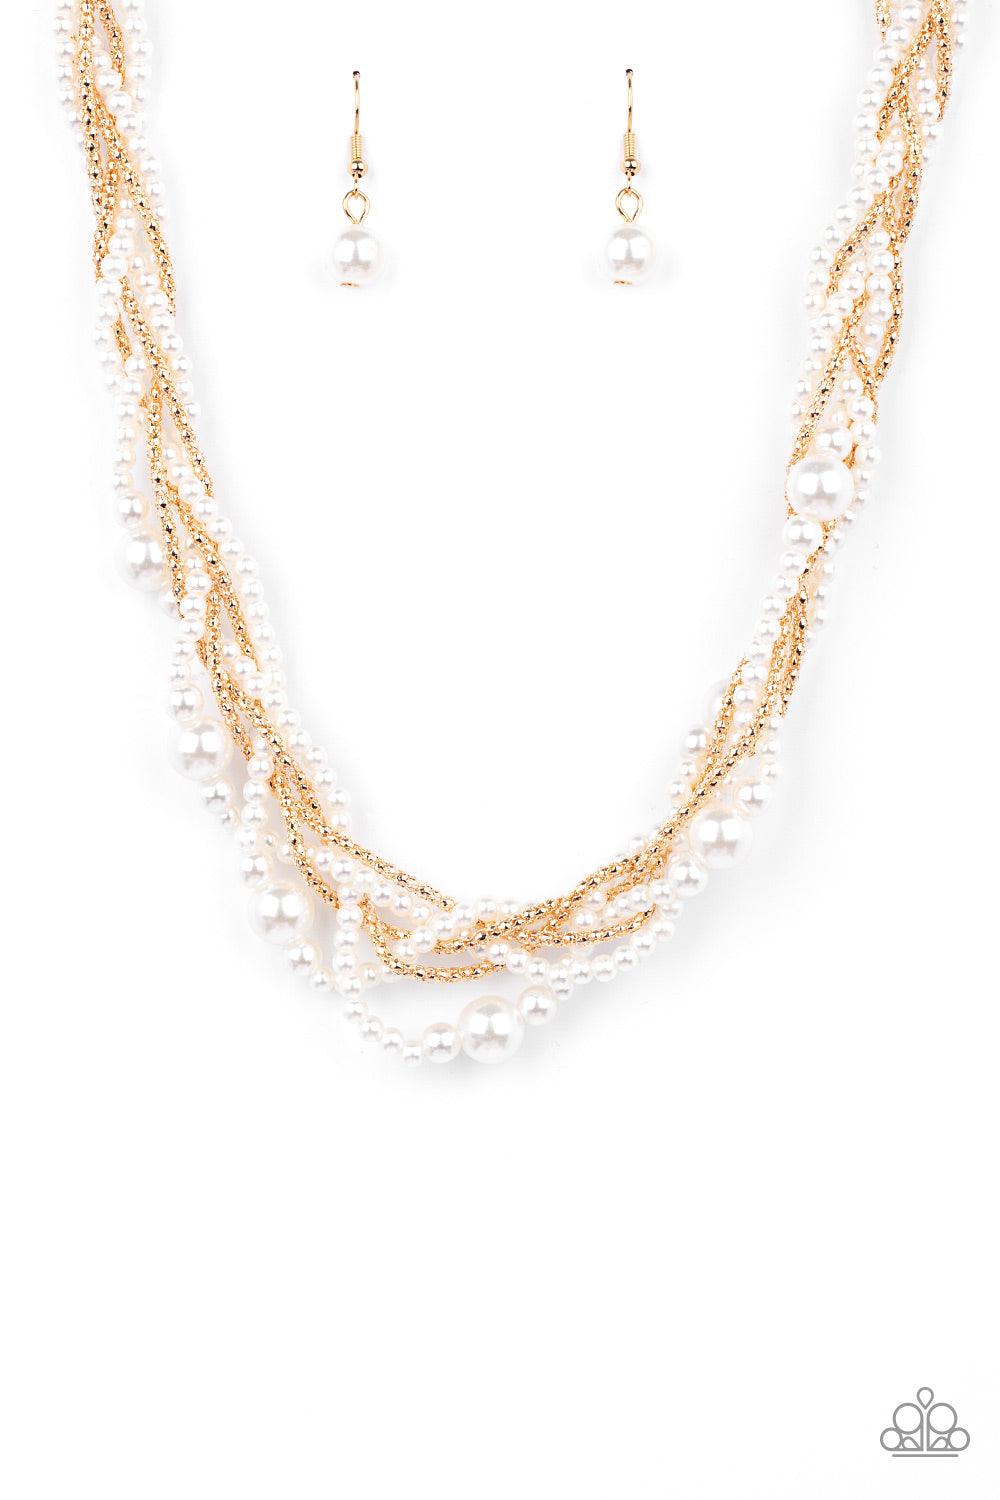 Paparazzi Accessories Royal Reminiscence - Gold Capped in gold fittings, strands of bubbly white pearls and dainty gold popcorn chains delicately weave below the collar, creating an elegantly effervescent centerpiece. Features an adjustable clasp closure.